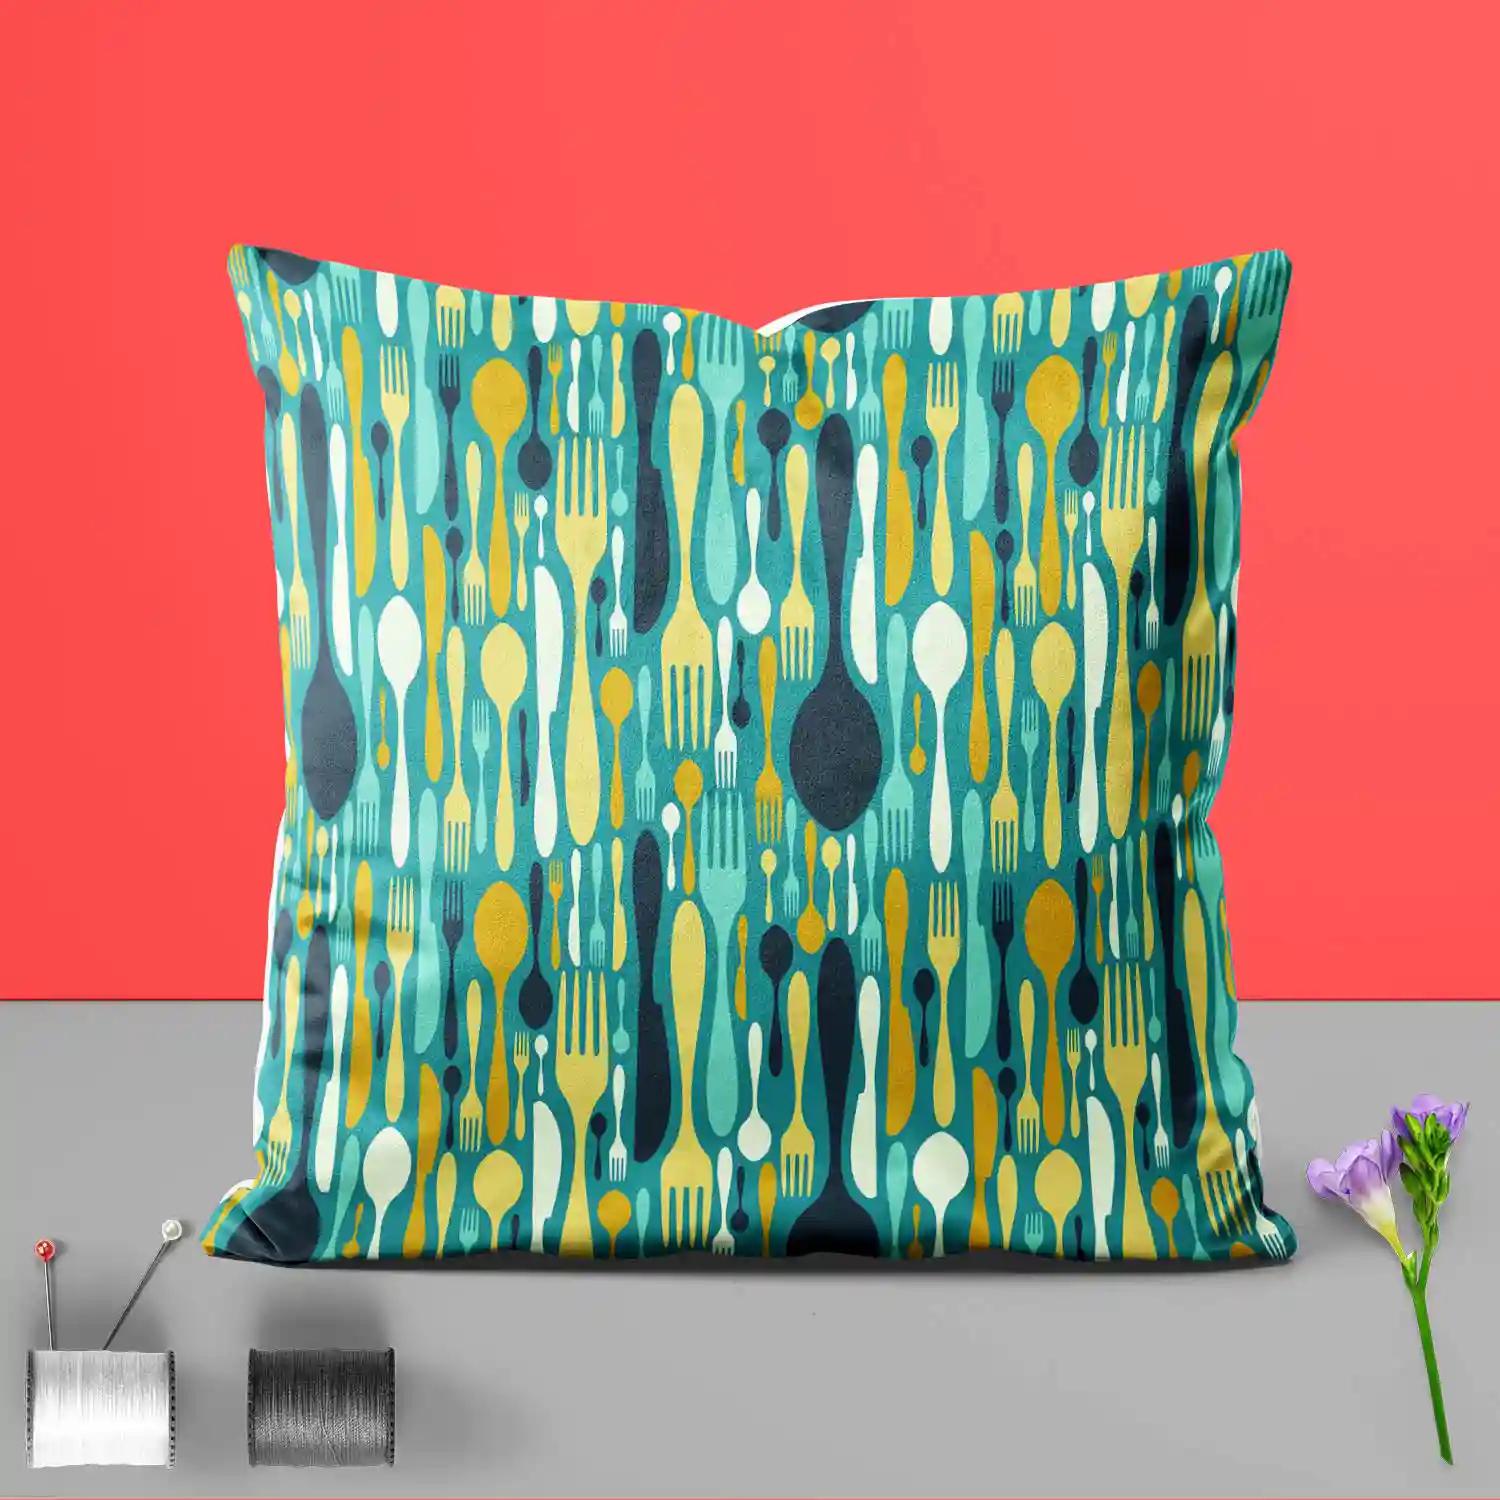 ArtzFolio Cutlery | Decorative Cushion Cover for Bedroom & Living Room